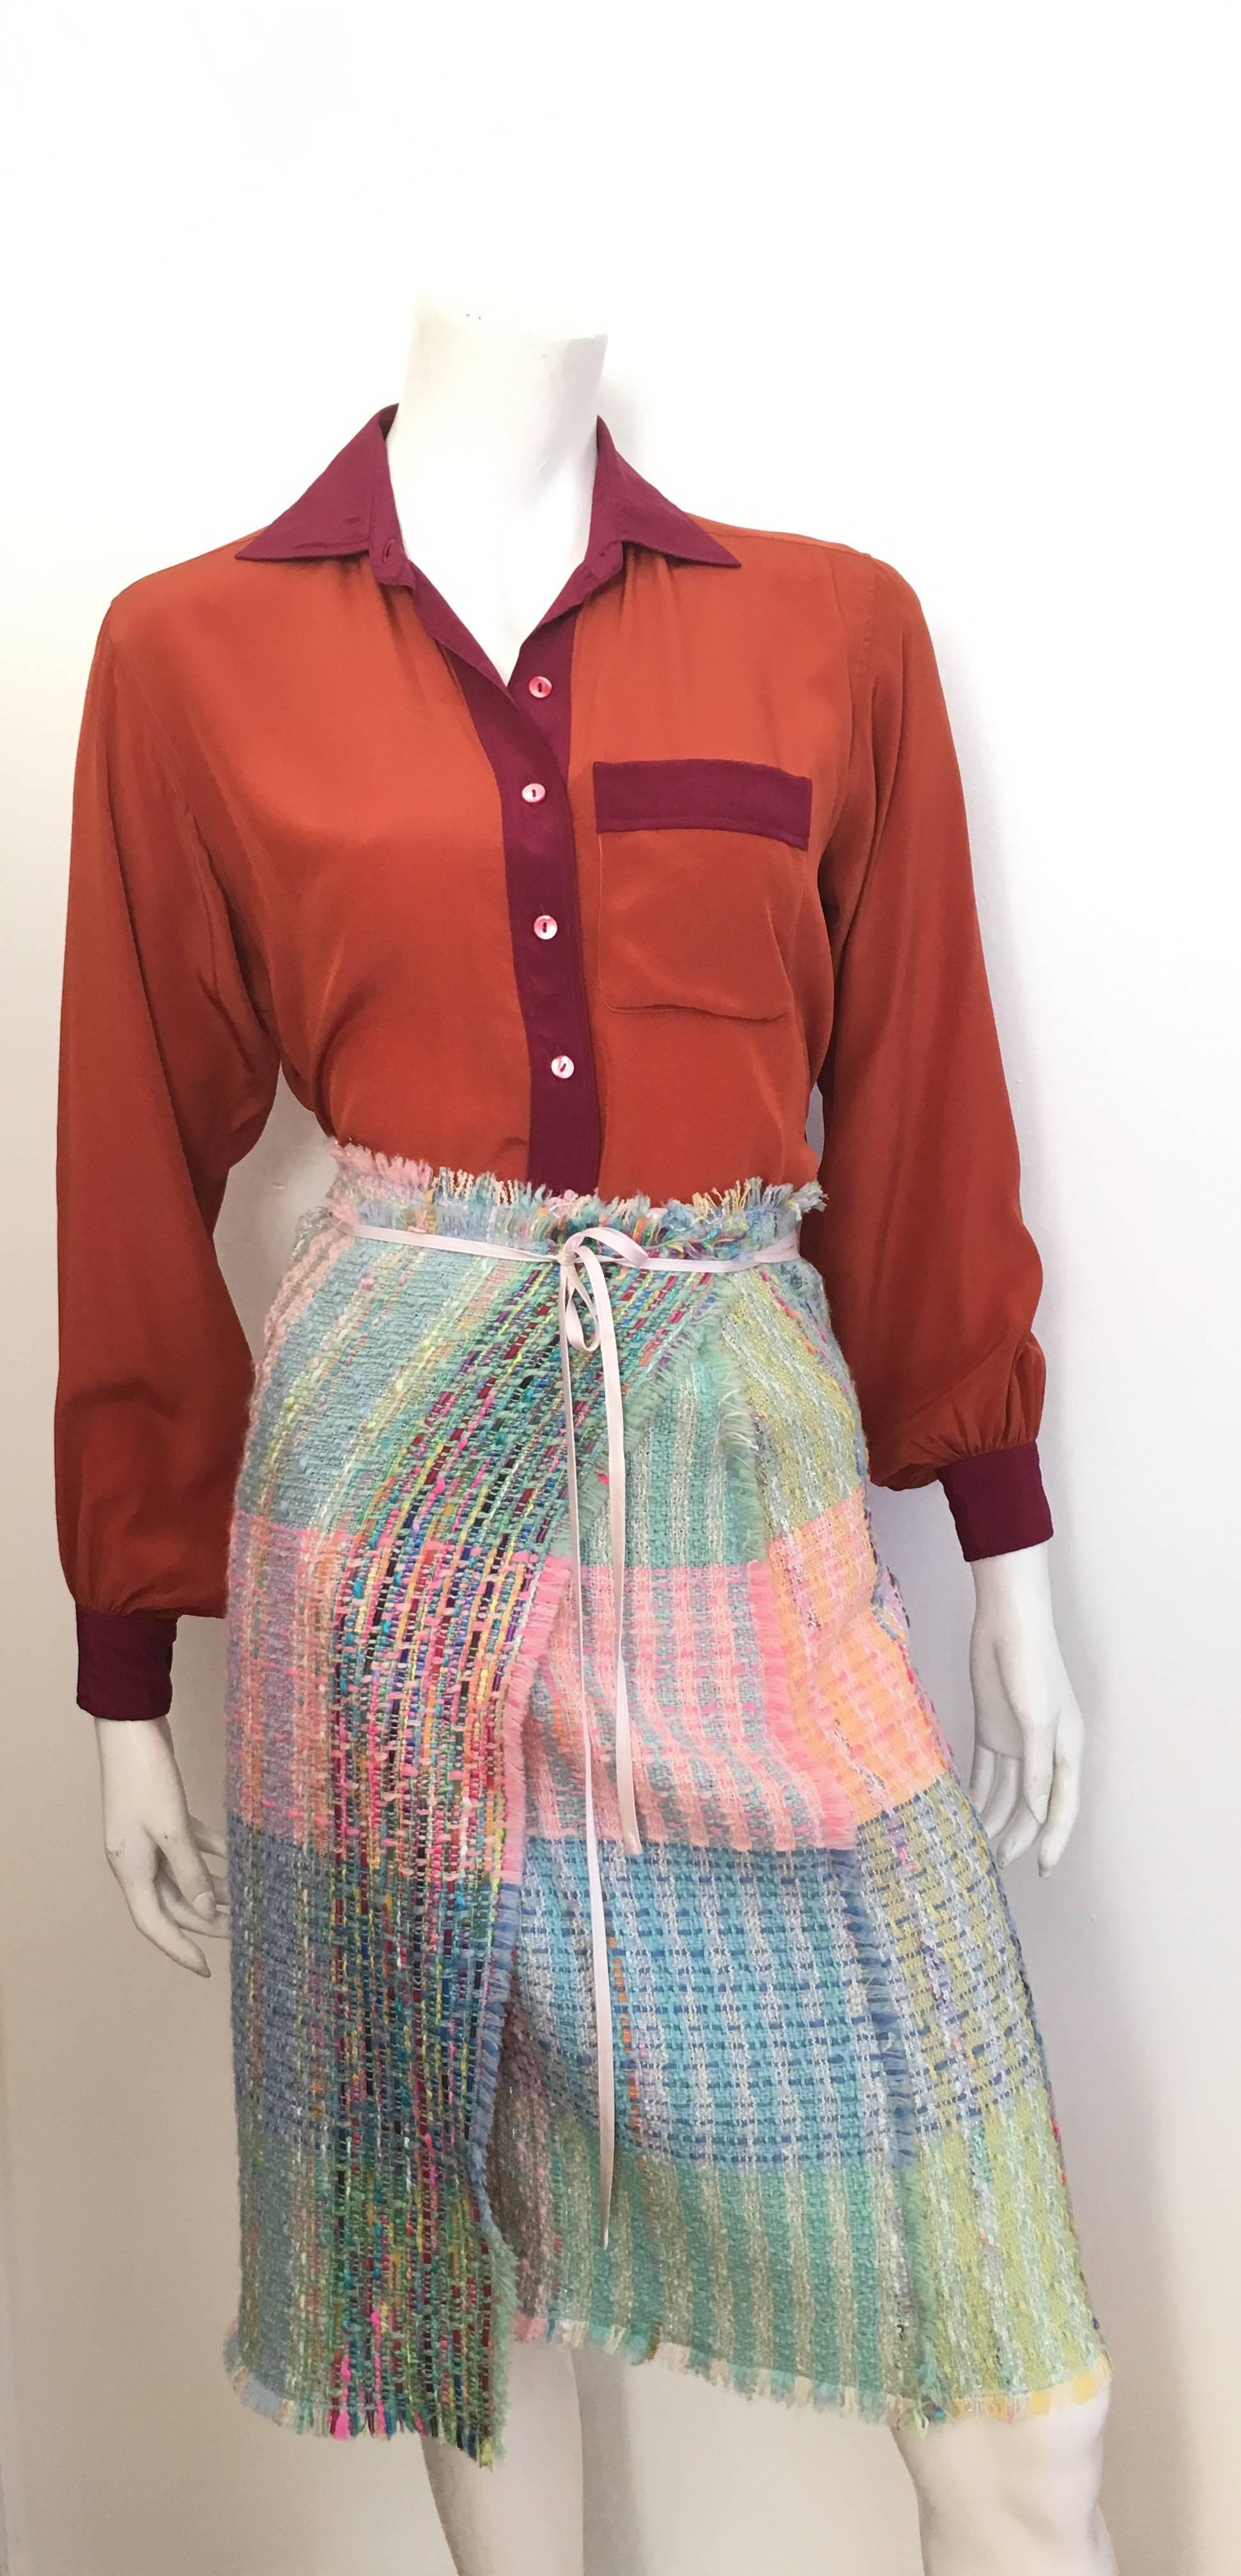 Yves Saint Laurent for Saint Laurent Rive Gauche 1970s rust brown with purple trim silk blouse will fit a size 4. This YSL silk blouse is a classic & timeless design that looks amazing today as when it was first created. Wear this YSL blouse with